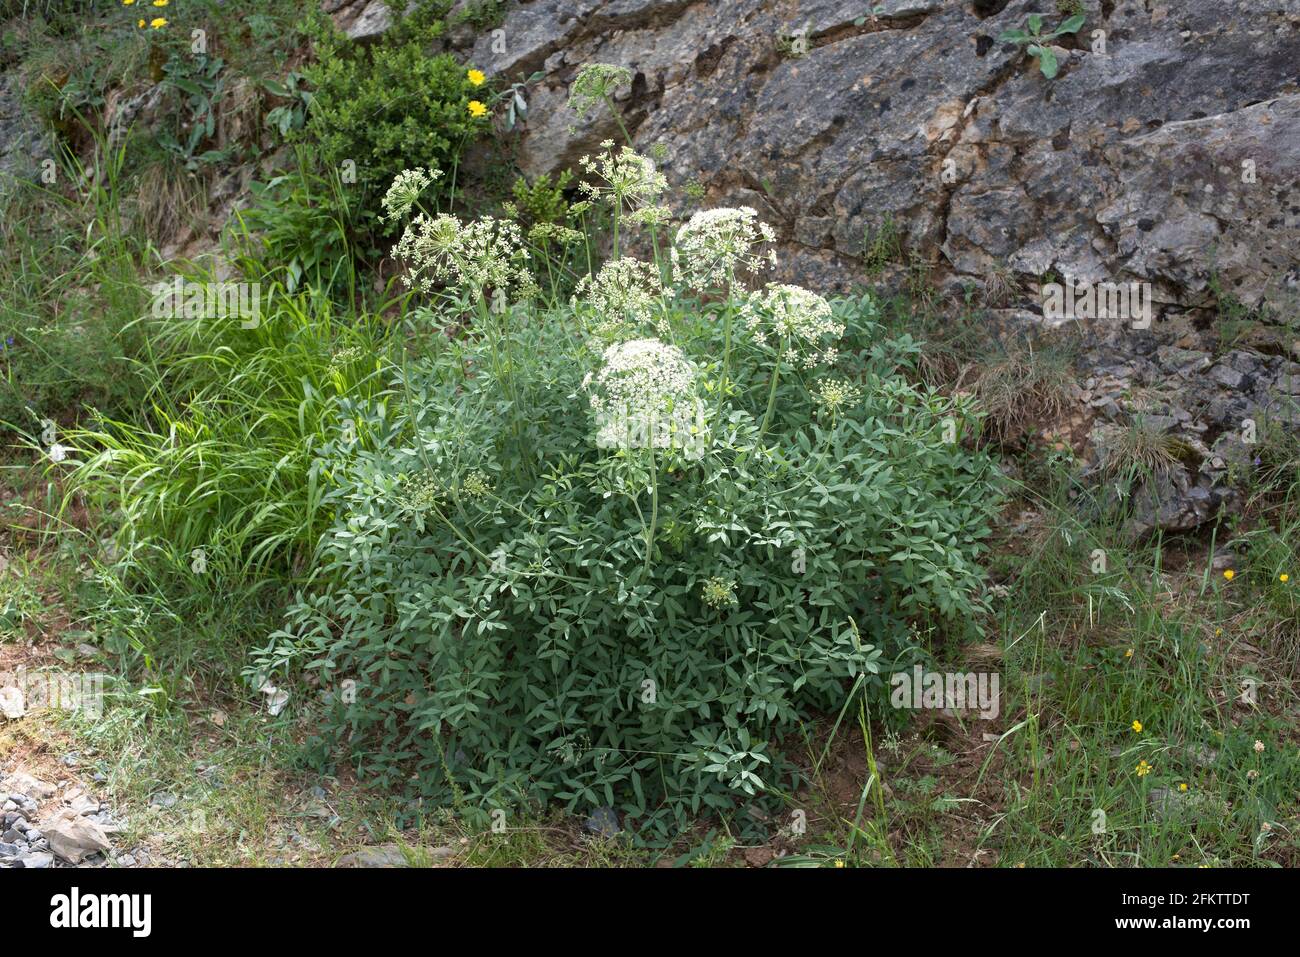 Broad-leaved sermountain (Laserpitium latifolium) is a perennial herb native to Europe. This photo was taken in Añisclo Canyon, Huesca province, Stock Photo